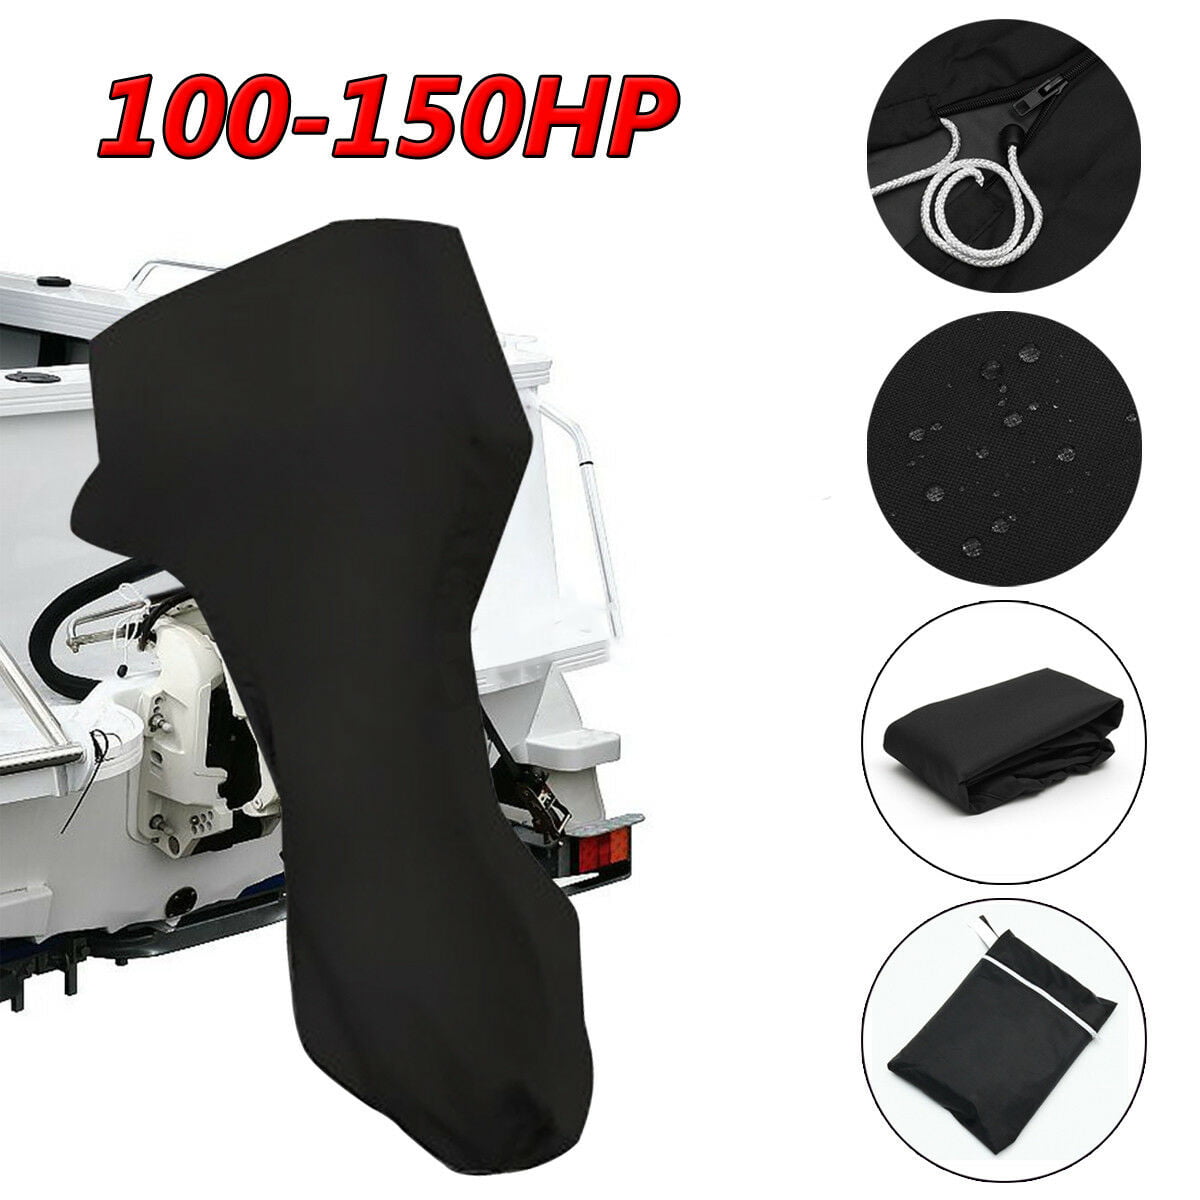 600D Boat Full Outboard Engine Motor Cover Fits Up to 6-225HP Black Waterproof 